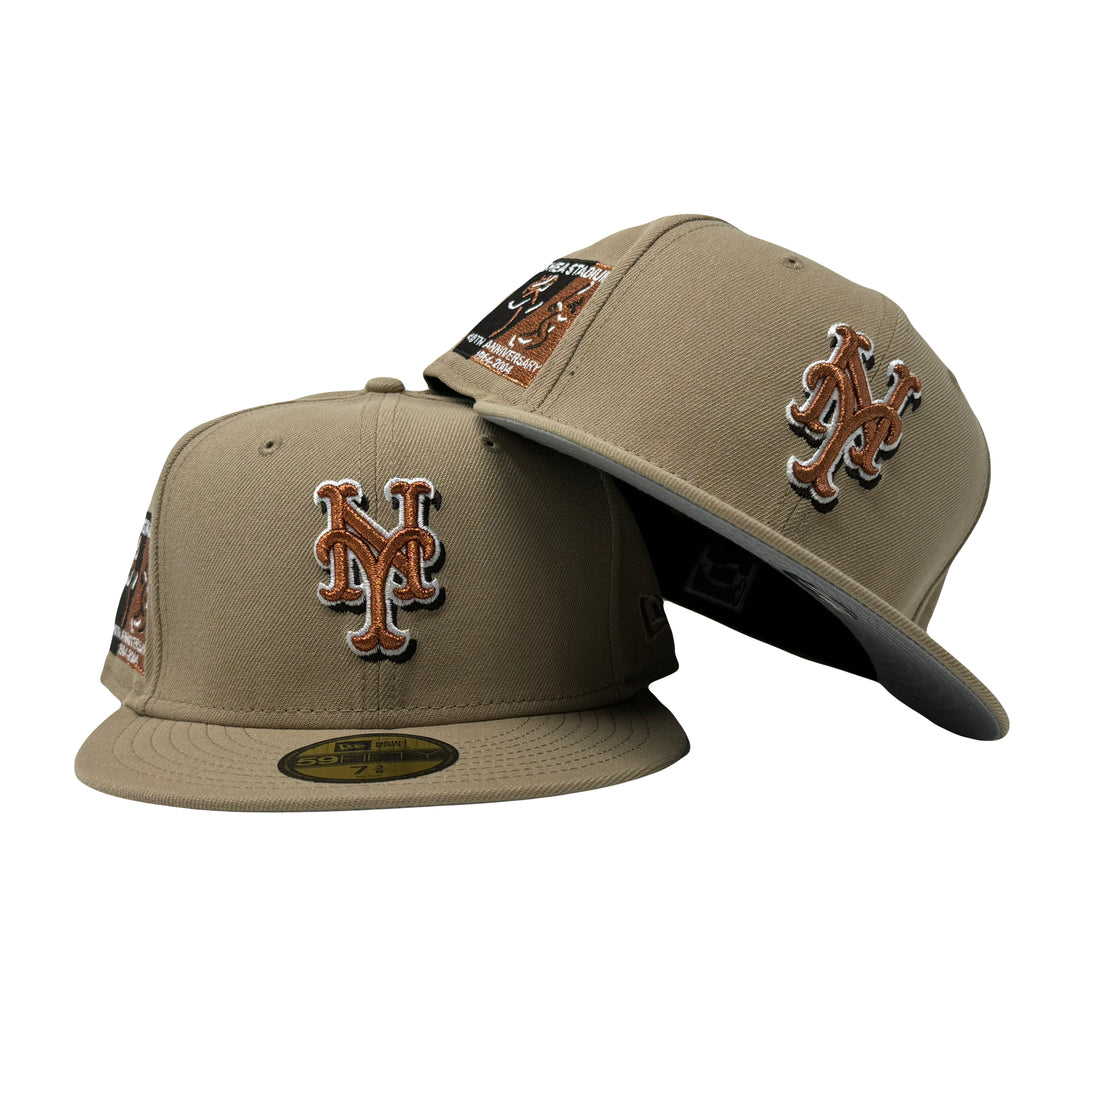 New York Mets Shea Stadium Camel 5950 New Era Fitted Hat